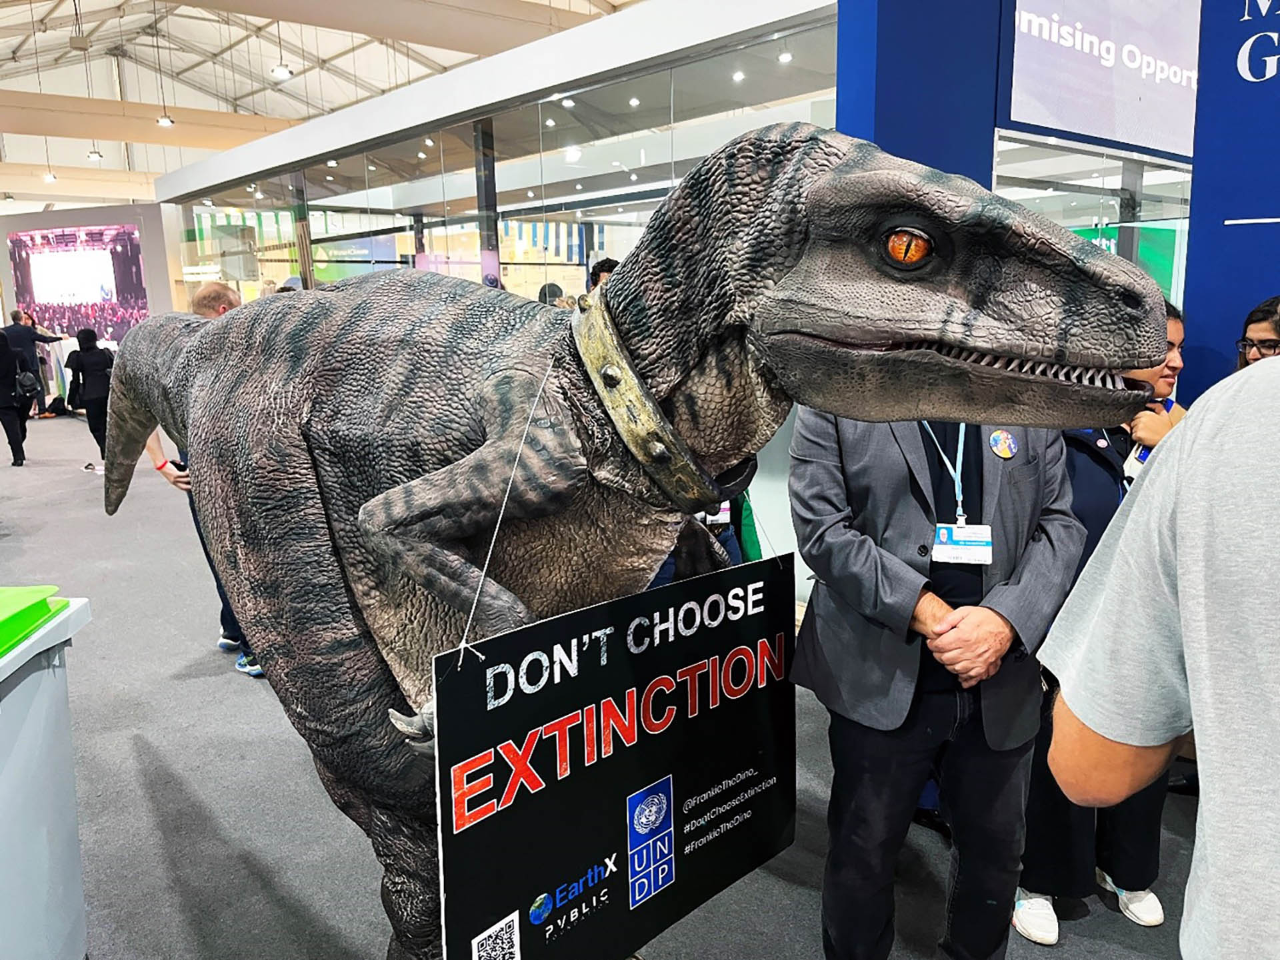 A photo from inside a pavilion hall with a dinosaur costume warning of the potential extinction due to climate change.